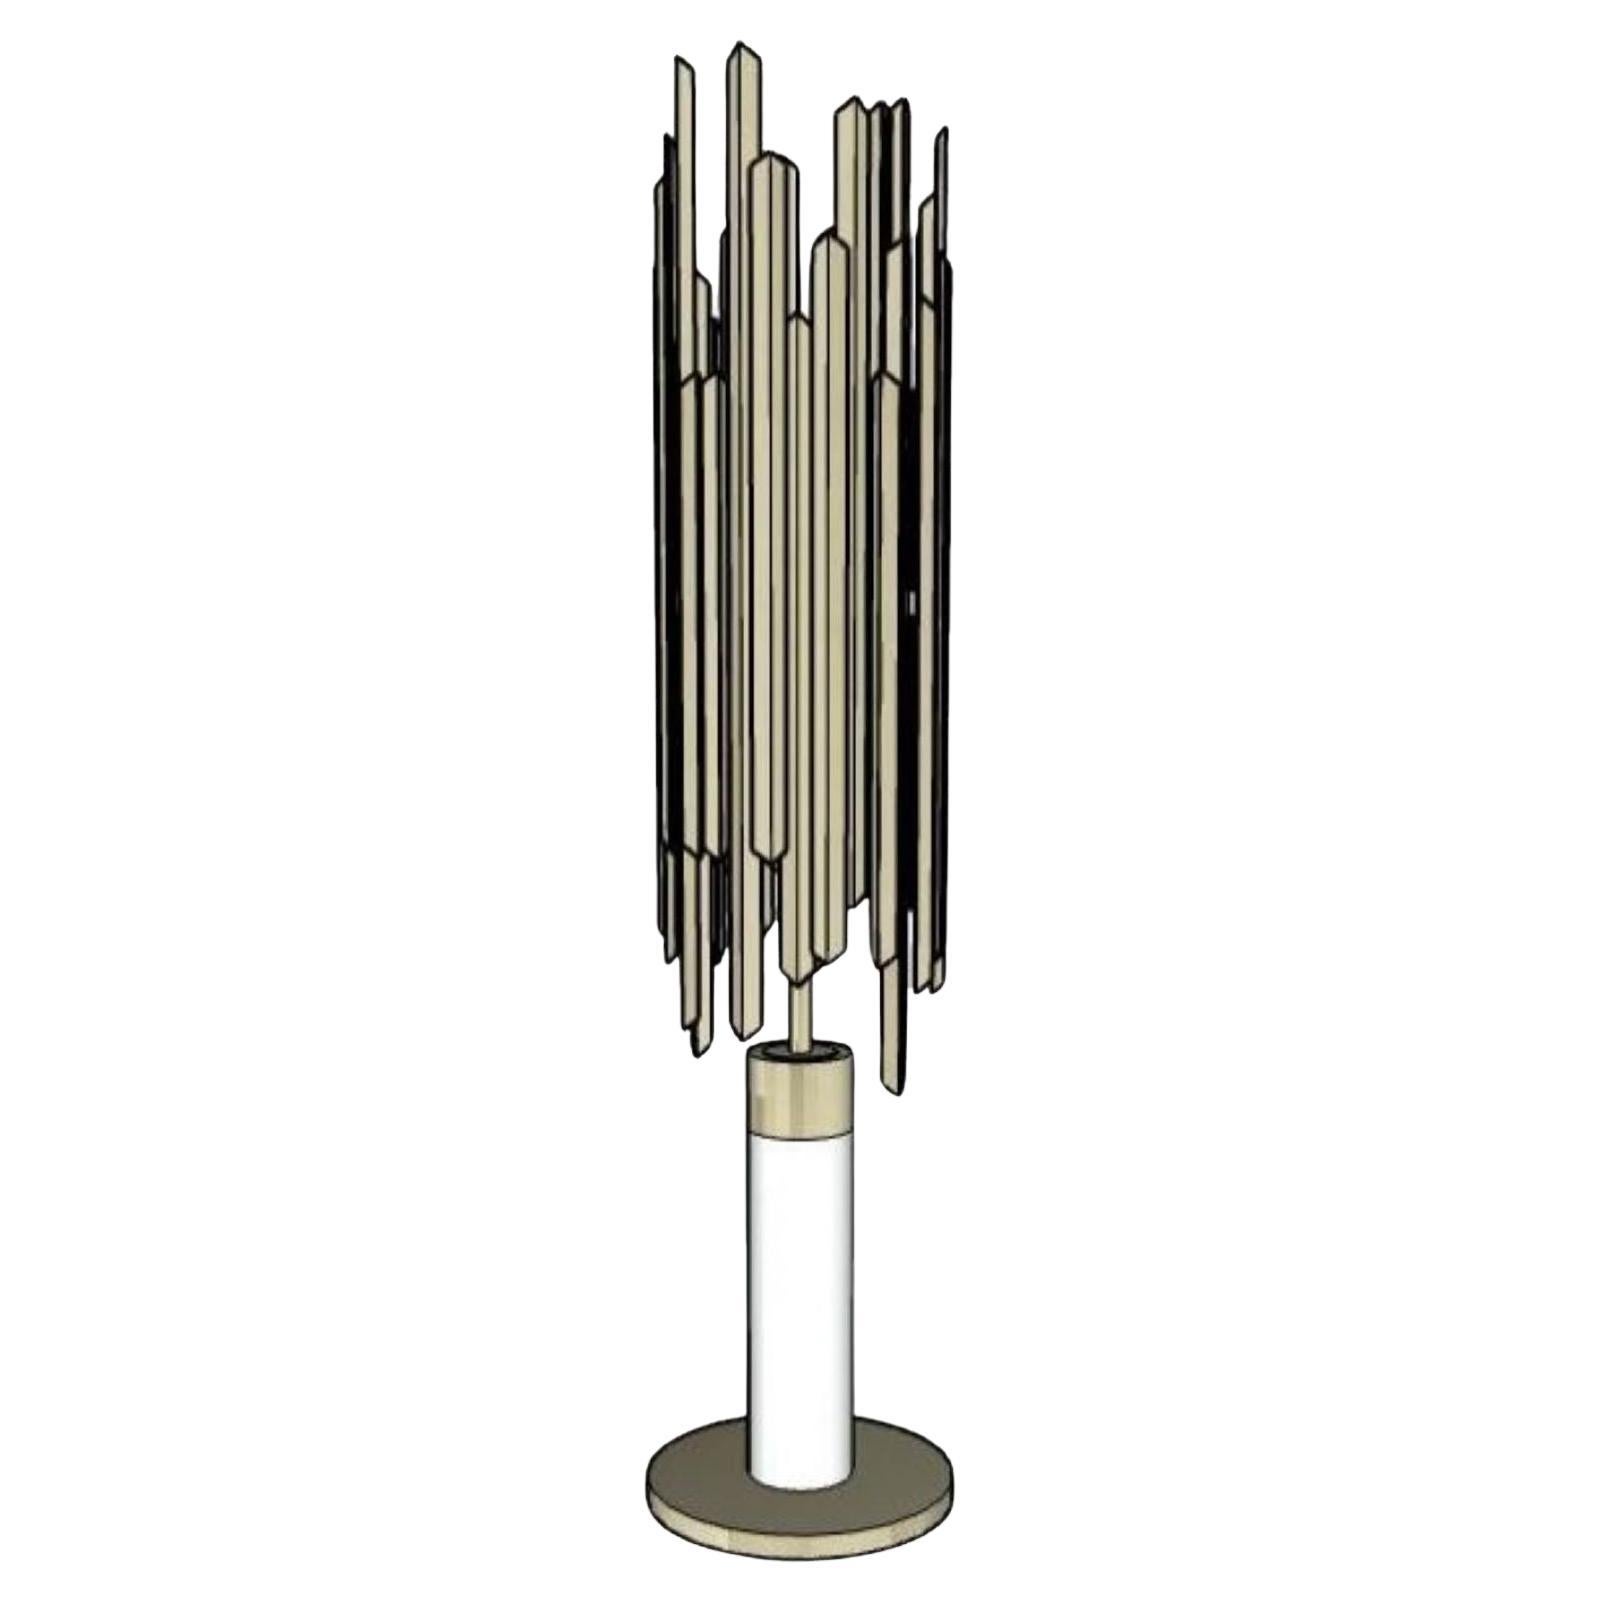 This table lamp is part of a visionary collection that uses the exceptional qualities of brass and the fascinating formation of ice shards to create a chic and unusual collection of lighting perfect for giving an exclusive feel to any